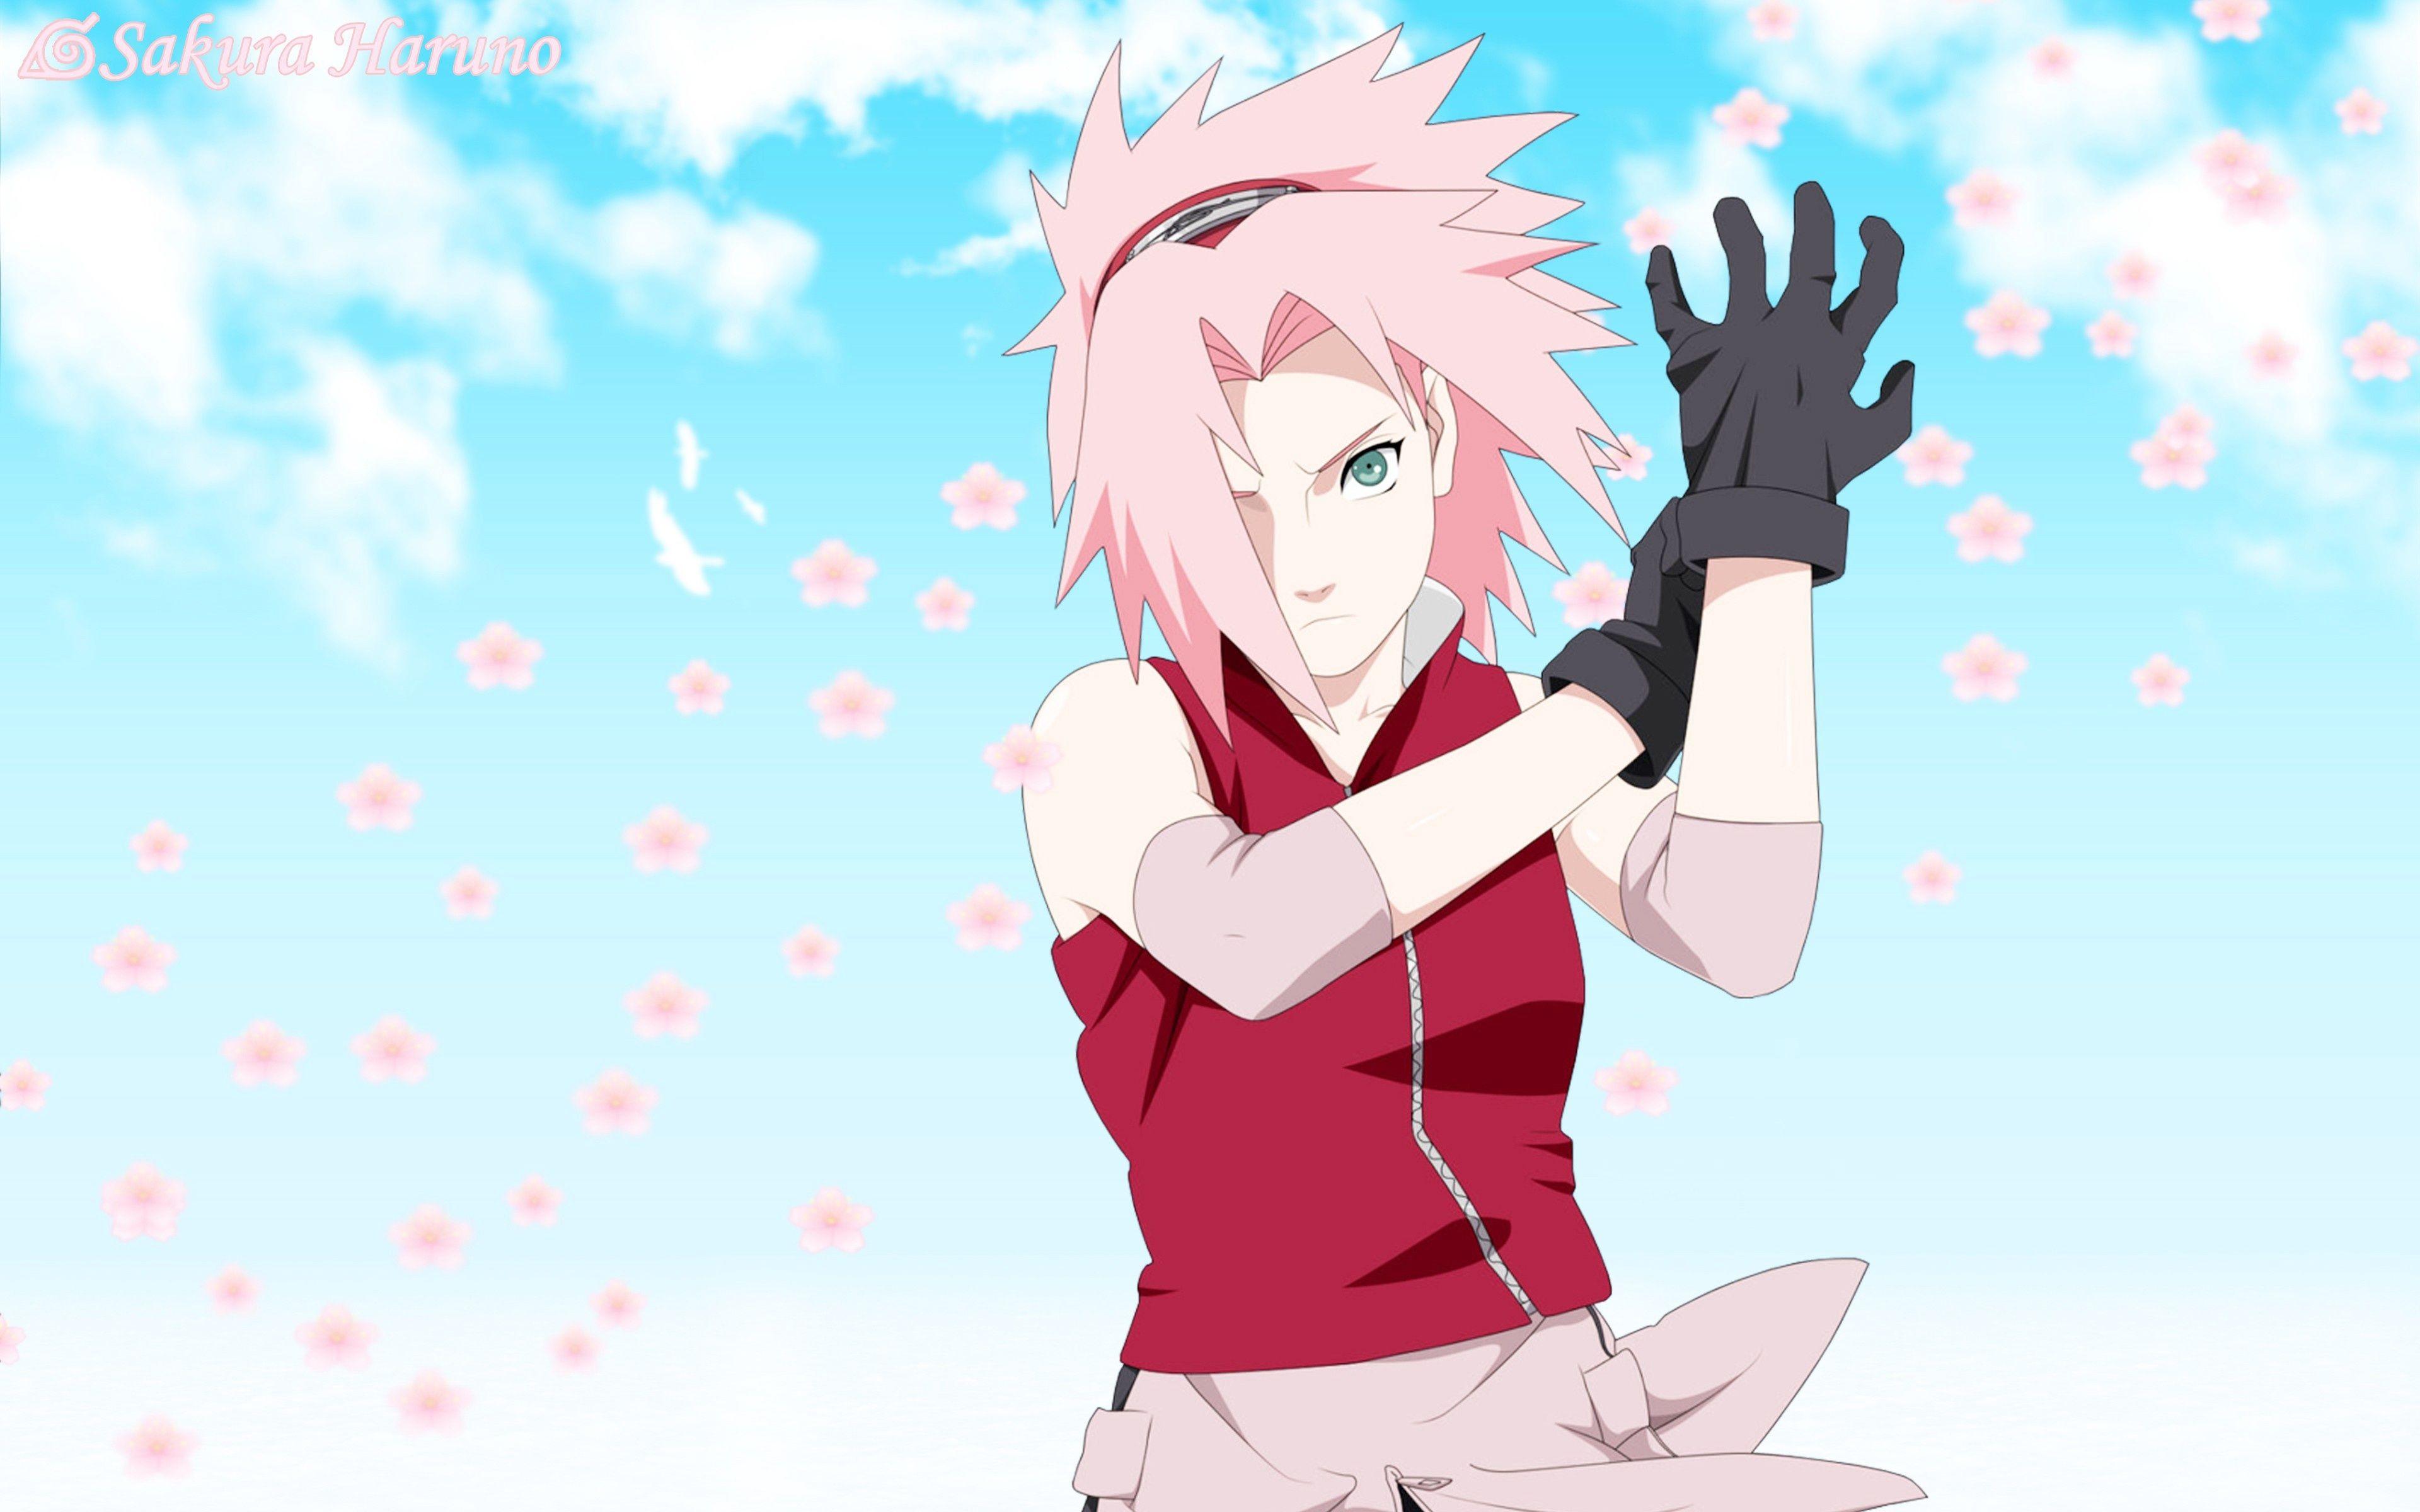 4. Sakura Haruno: Sakura's punches would damage Luffy even though he can act as rubber. There's no way he can dodge her brute strength and make out of the fight alive.